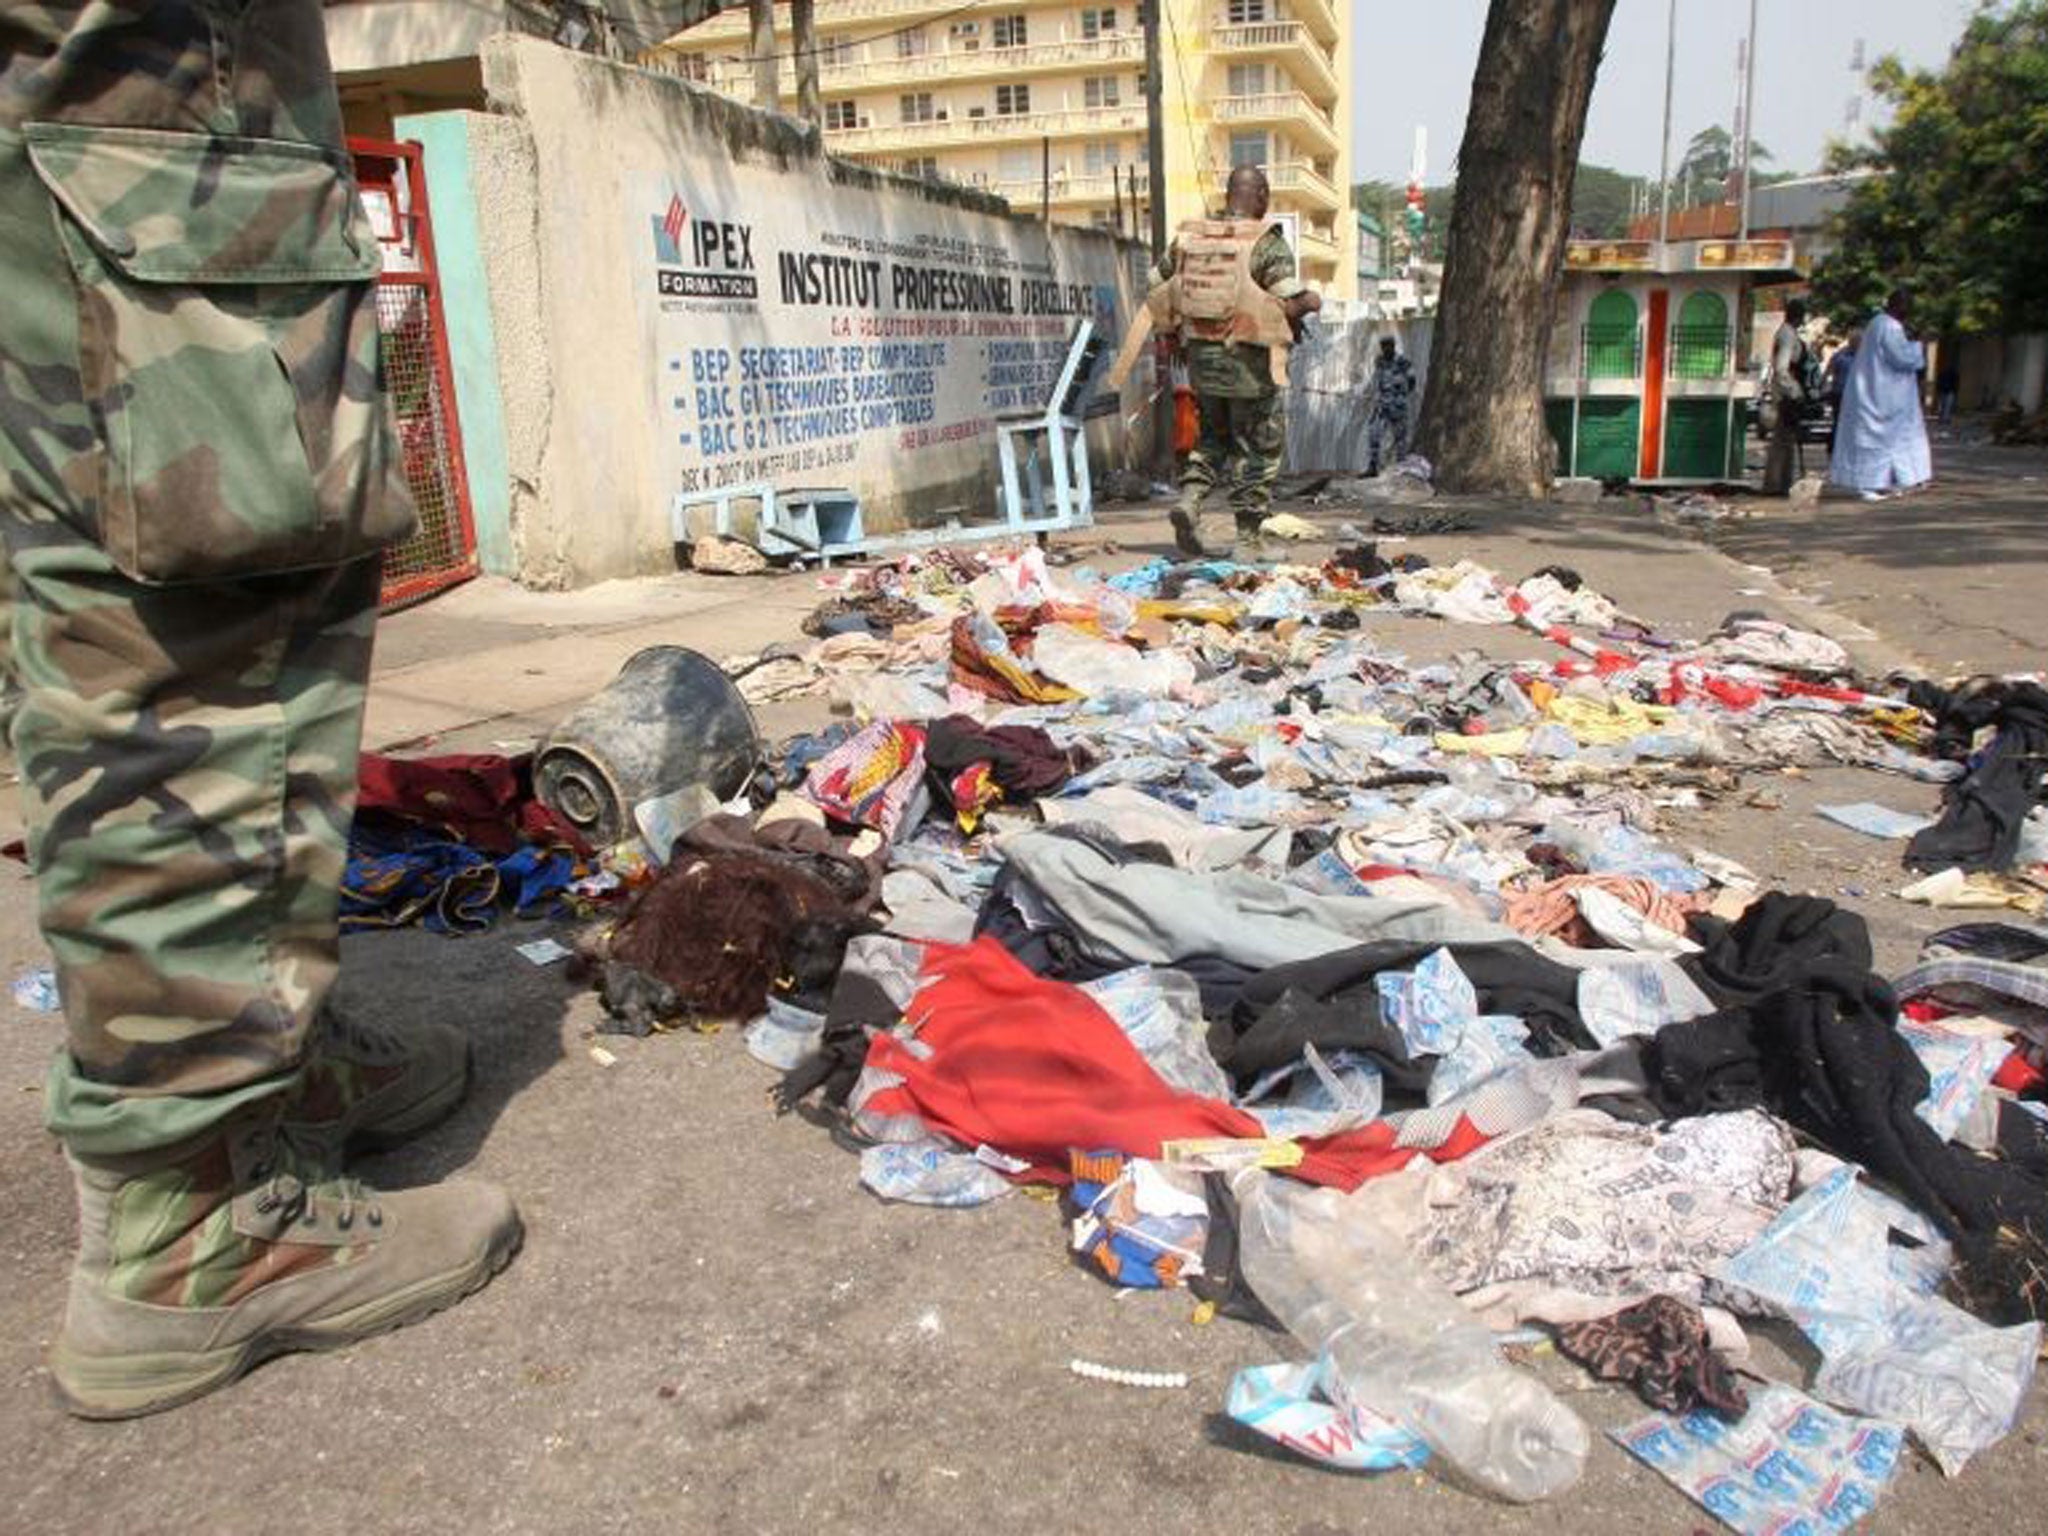 People stand next to clothing and various items spread over the pavement at the scene following a stampede in Abidjan